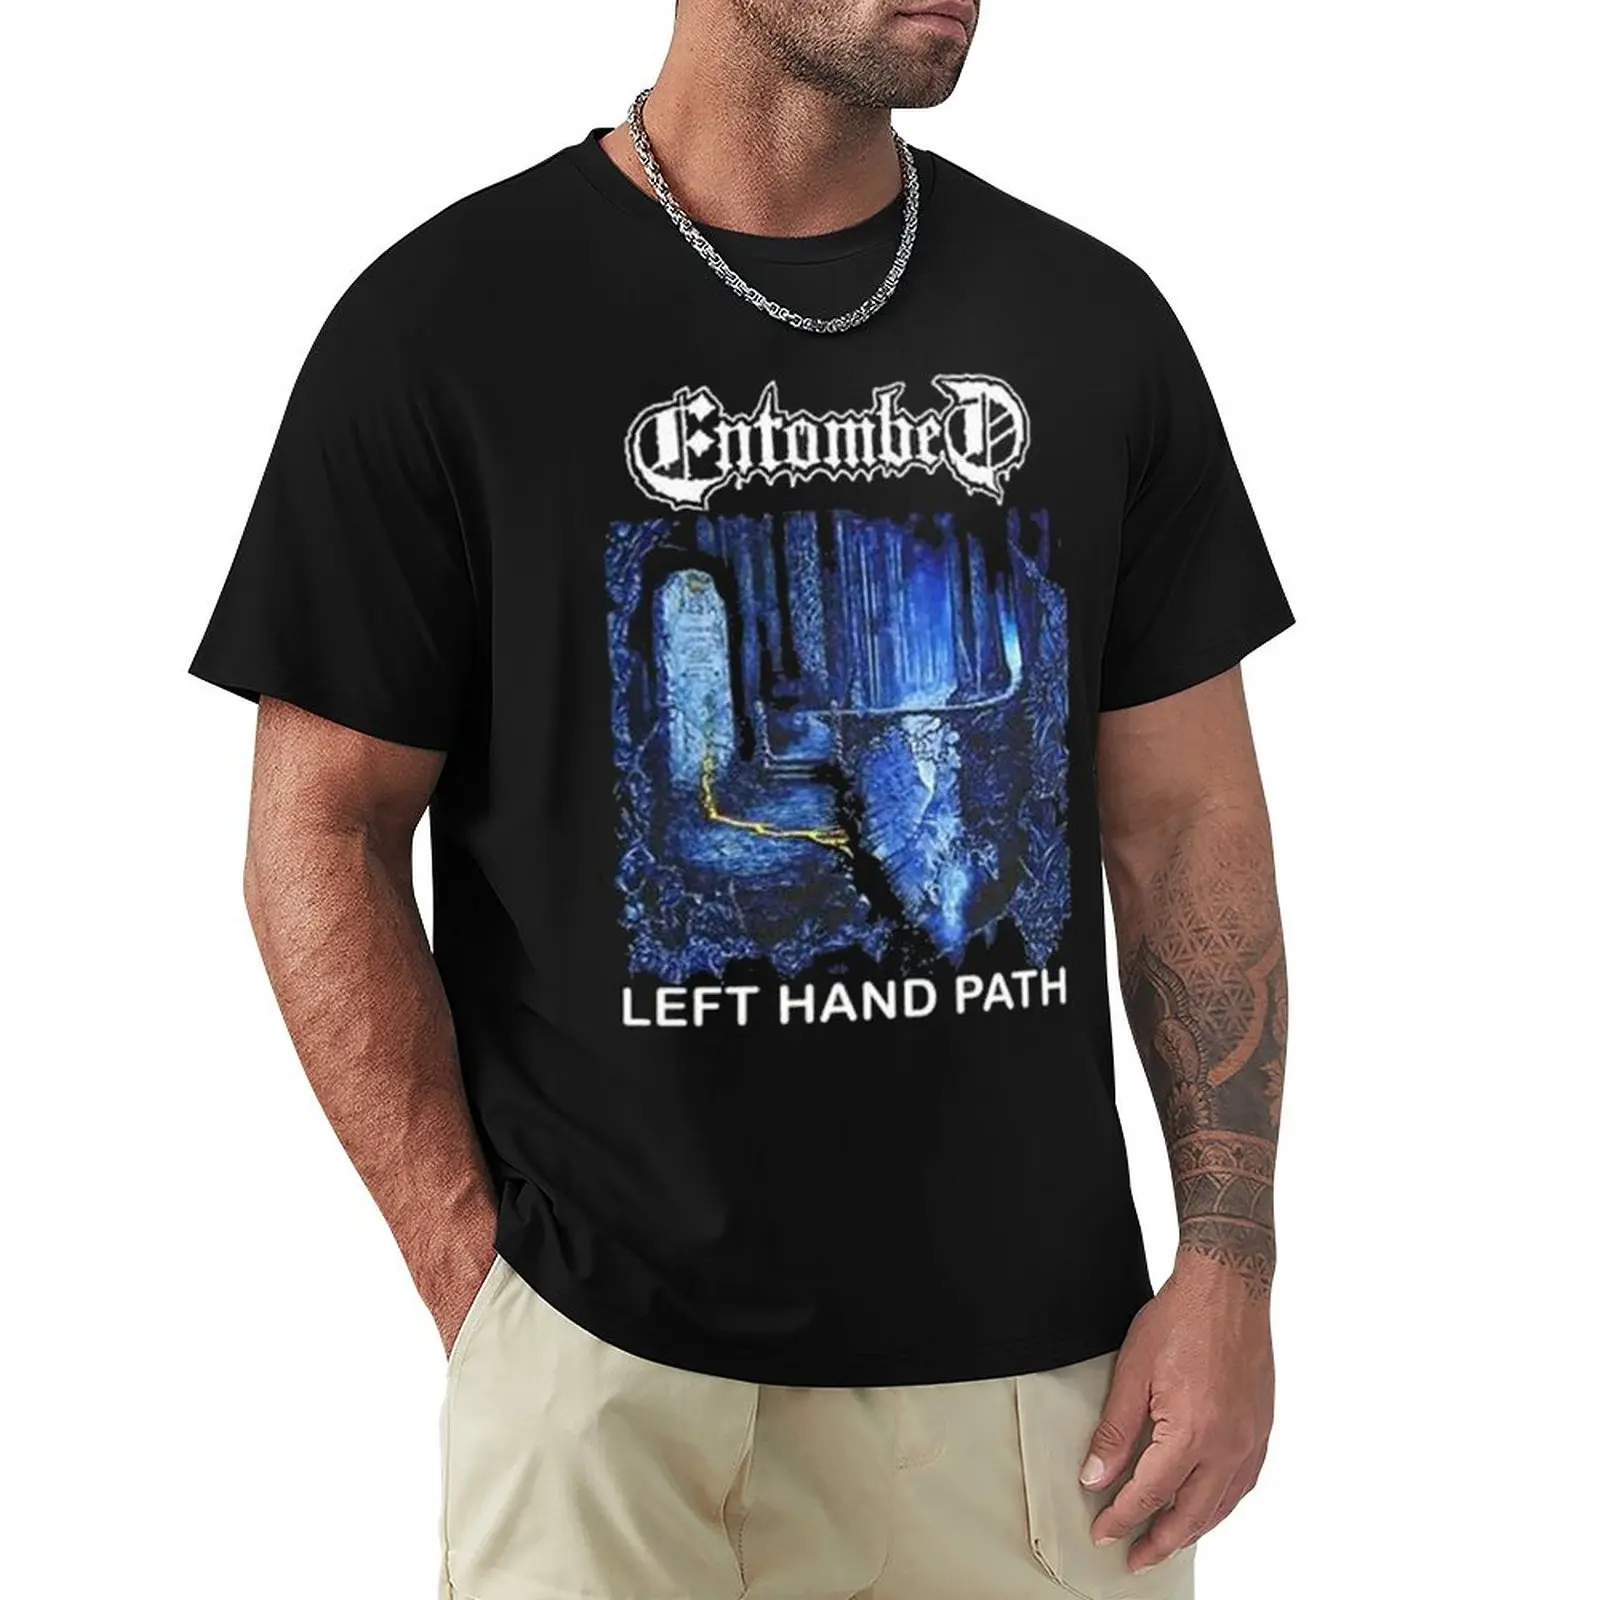 entombed essential T-Shirt blacks customs design your own cute tops mens workout shirts